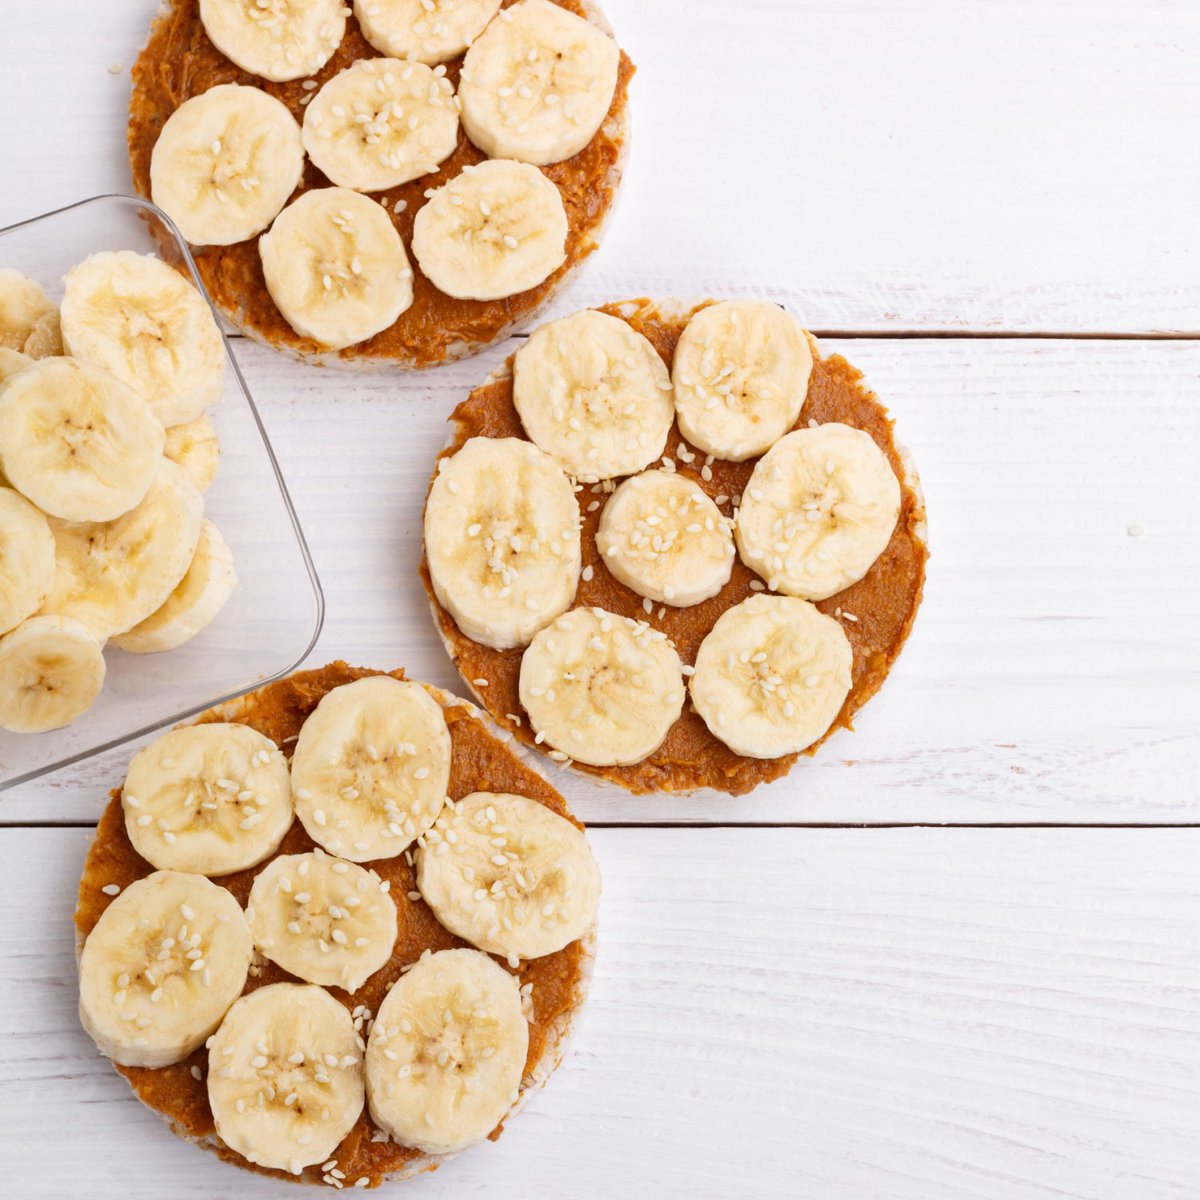 Easy #breakfast idea—grab #wholegrain #organic #ricecake spread on favorite #nutbutter top with banana coins & sprinkle of superseeds💪😋Fast & #delicious perfect for #MondayMorning 💯Grab #wholesome #ingredients tinyurl.com/2e5px8k9 #healthyfoods #plantbased #MondayMood #Food